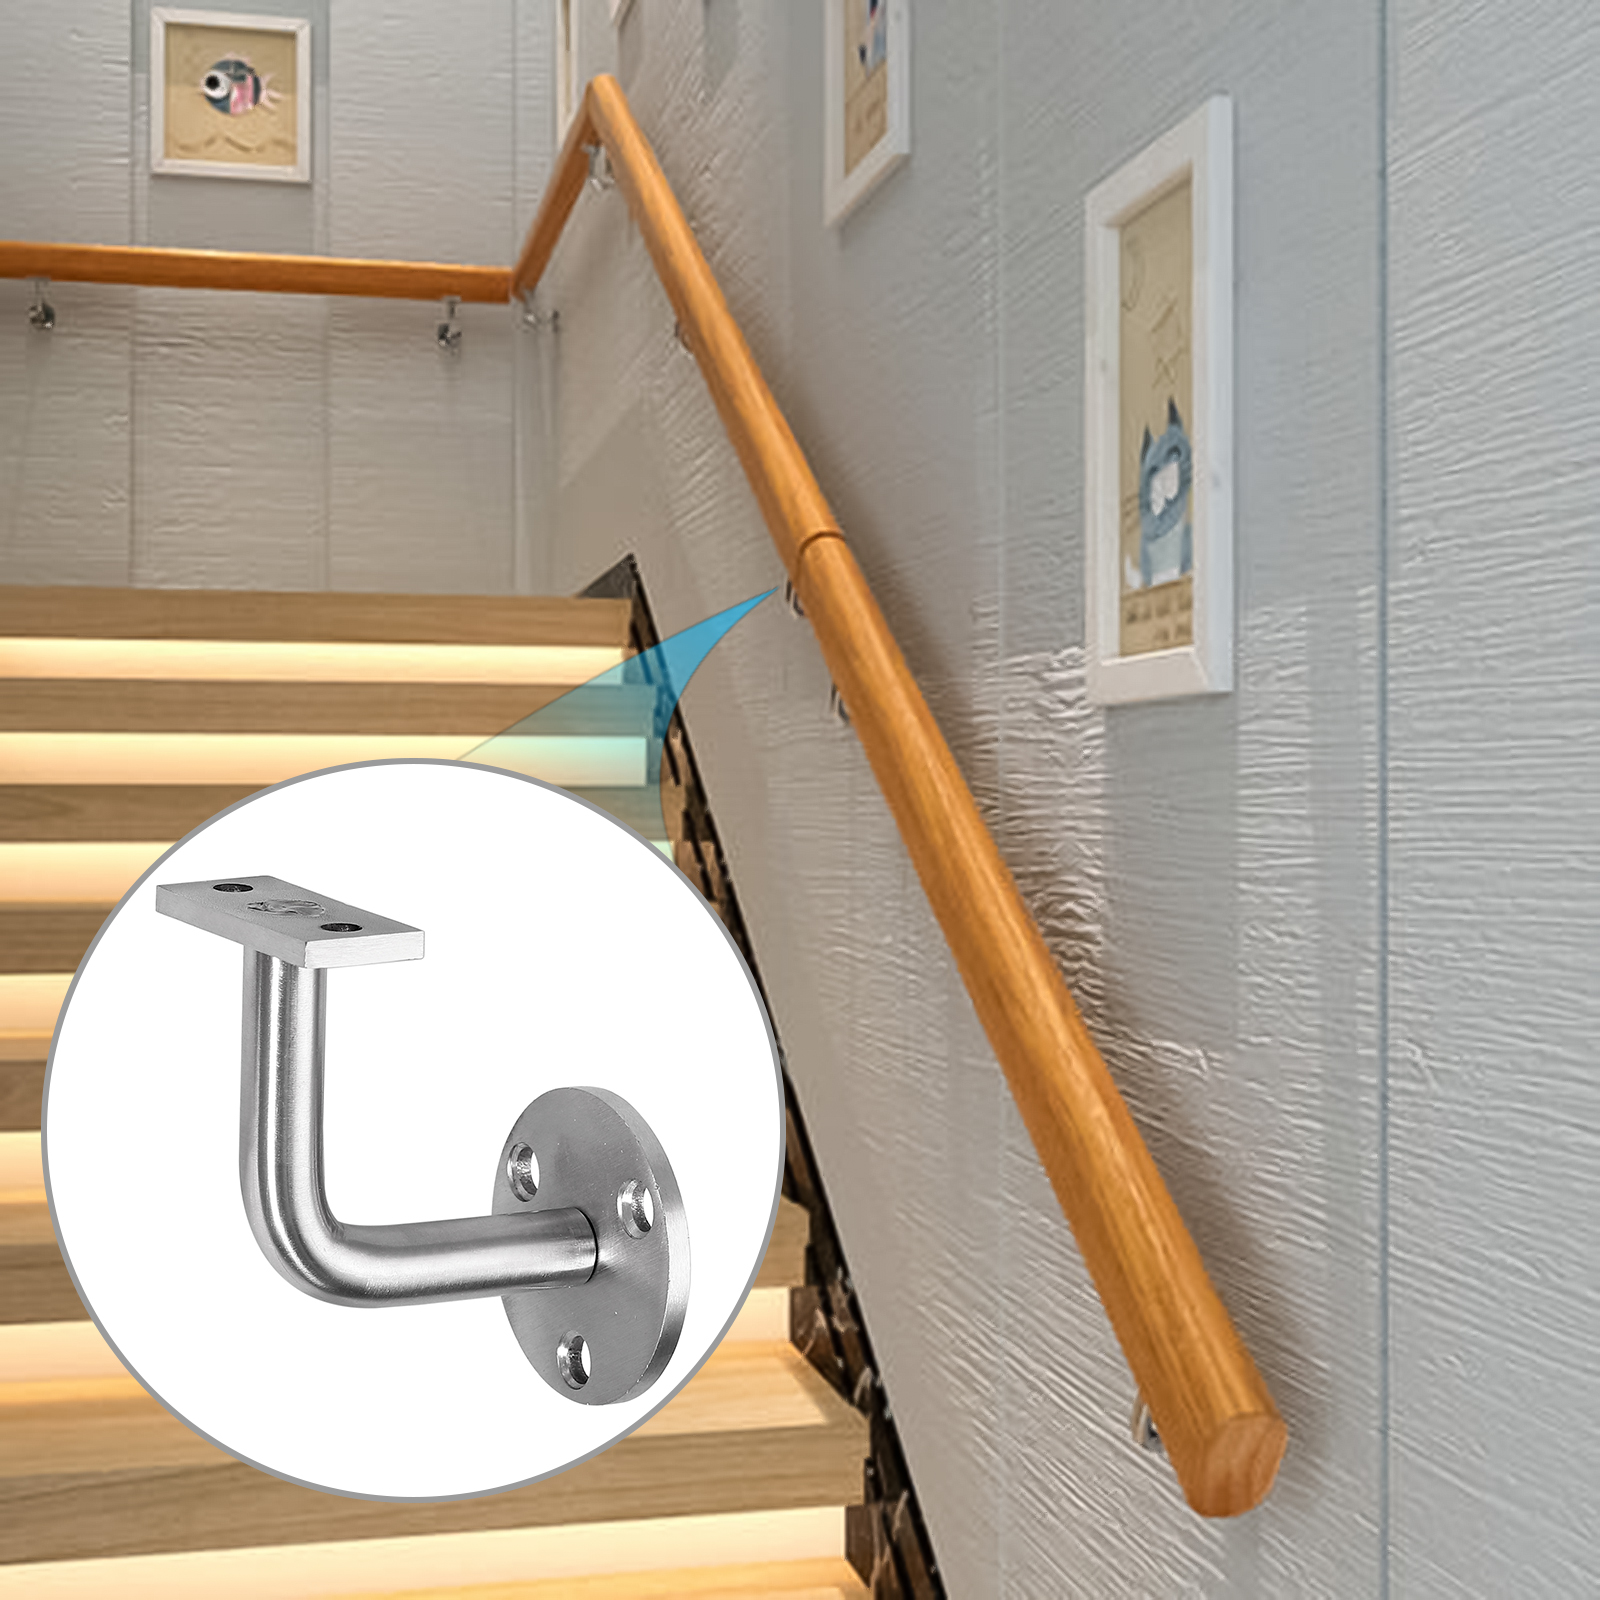 4x Handrail Bannister Stair Rail Wall Bracket Support Balustrade Fixing